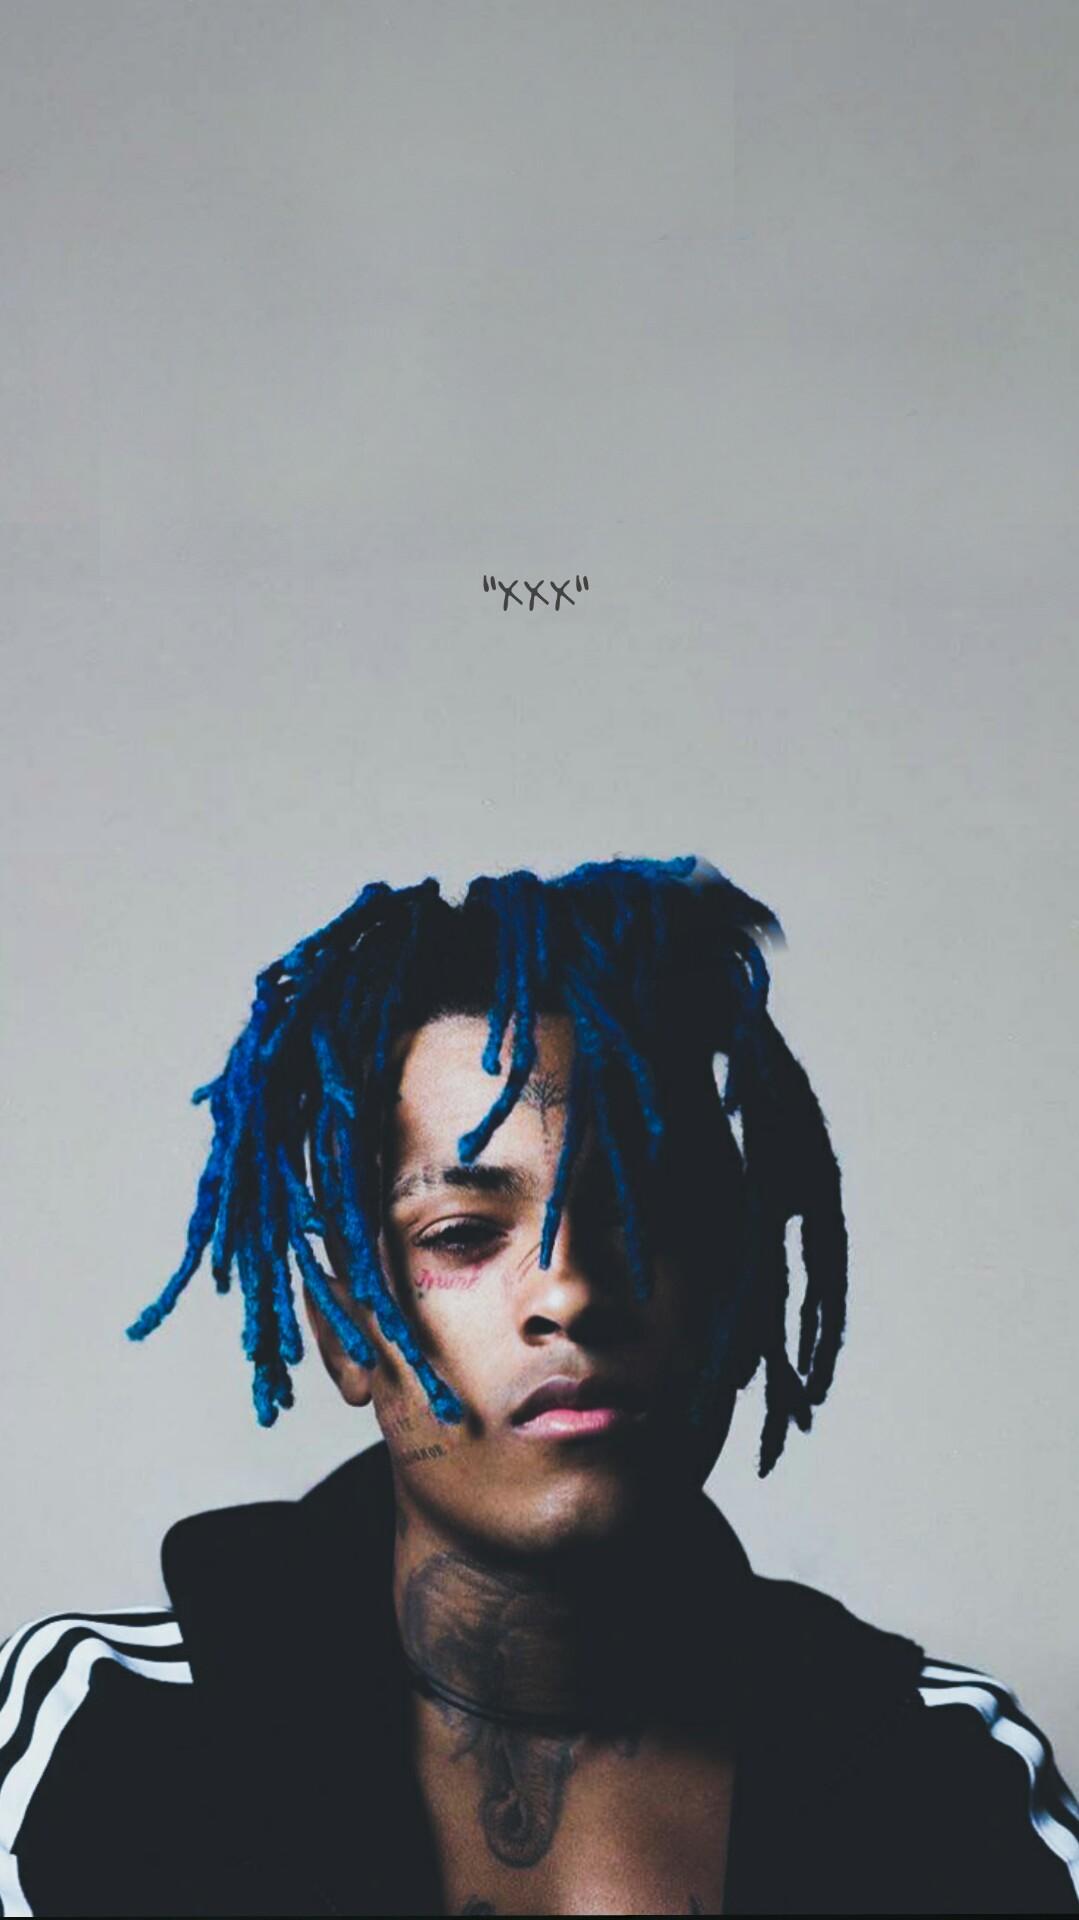 Someone Asked For It Here Simple XXXTENTACION WALLPAPER I Made